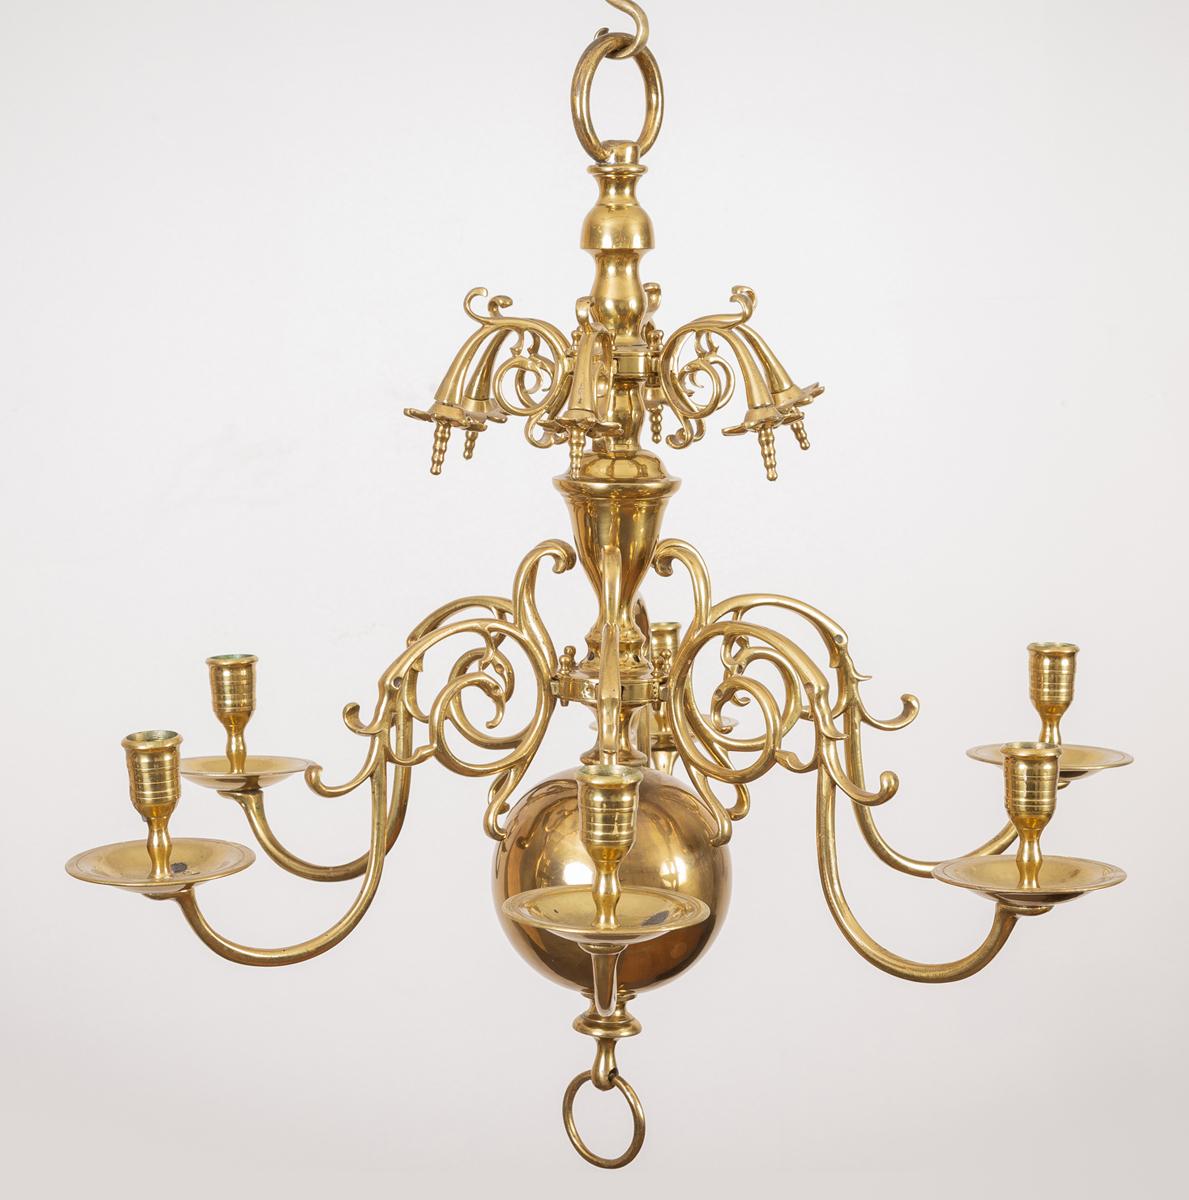 A classic Flemish brass six scrolled arm chandelier with two tiers issuing from the elegant central vase stem, the upper tier decorated with stylized flowers. At the moment this chandelier is for candle use, but can easily be wired for electricity.